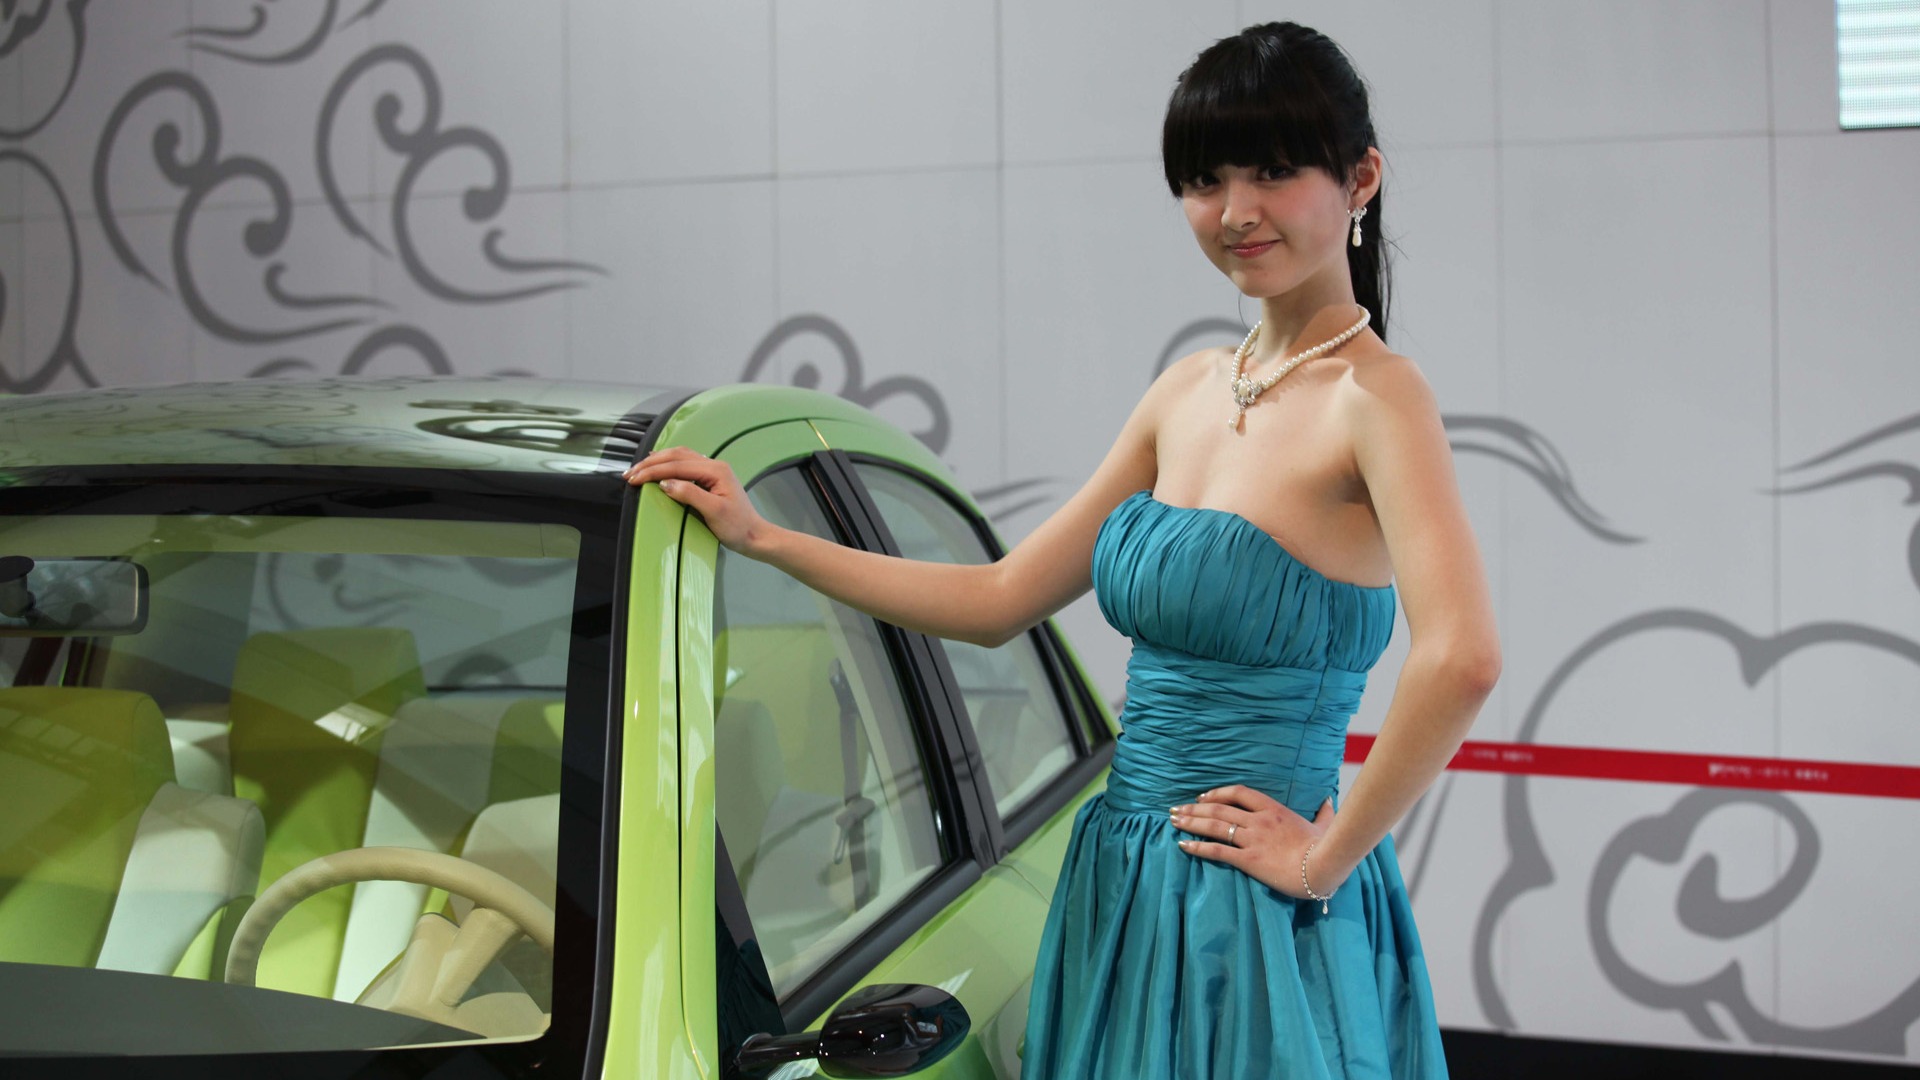 2010 Beijing International Auto Show beauty (1) (the wind chasing the clouds works) #34 - 1920x1080